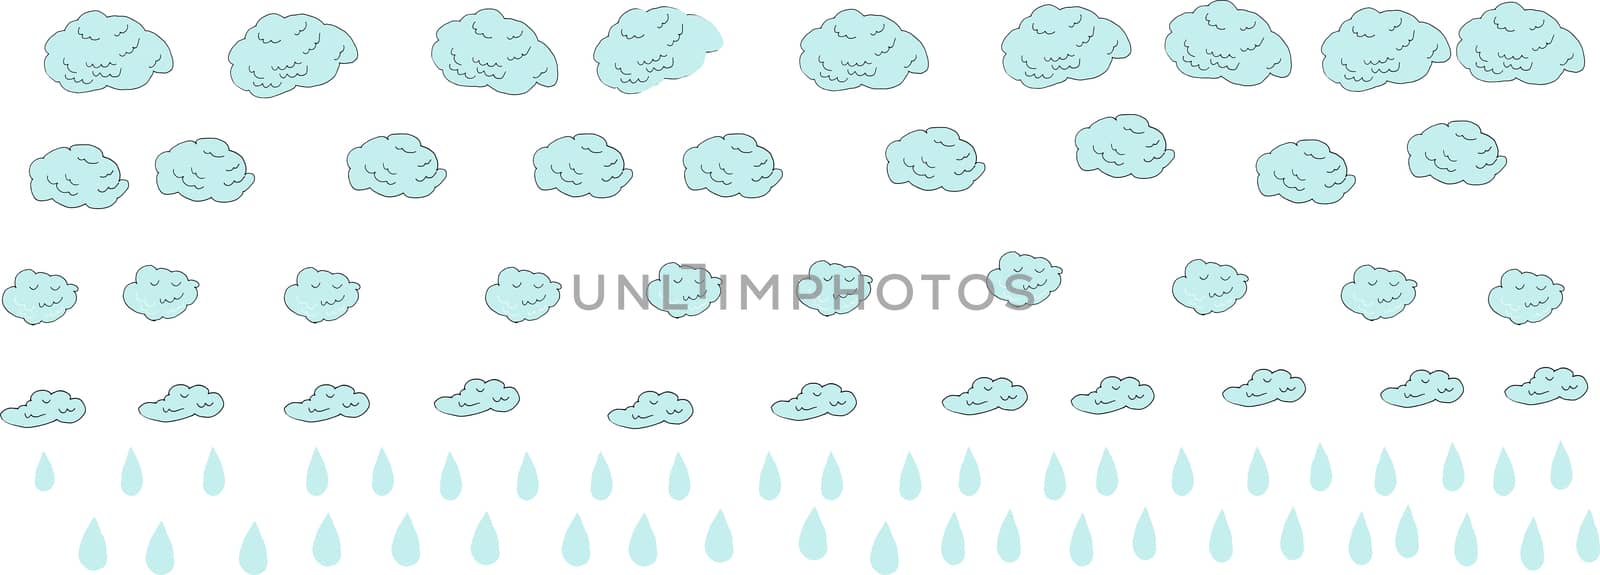 Doodle hand drawn sign of clouds and rain drops isolated on a white background. illustration of weather forecast banner by claire_lucia